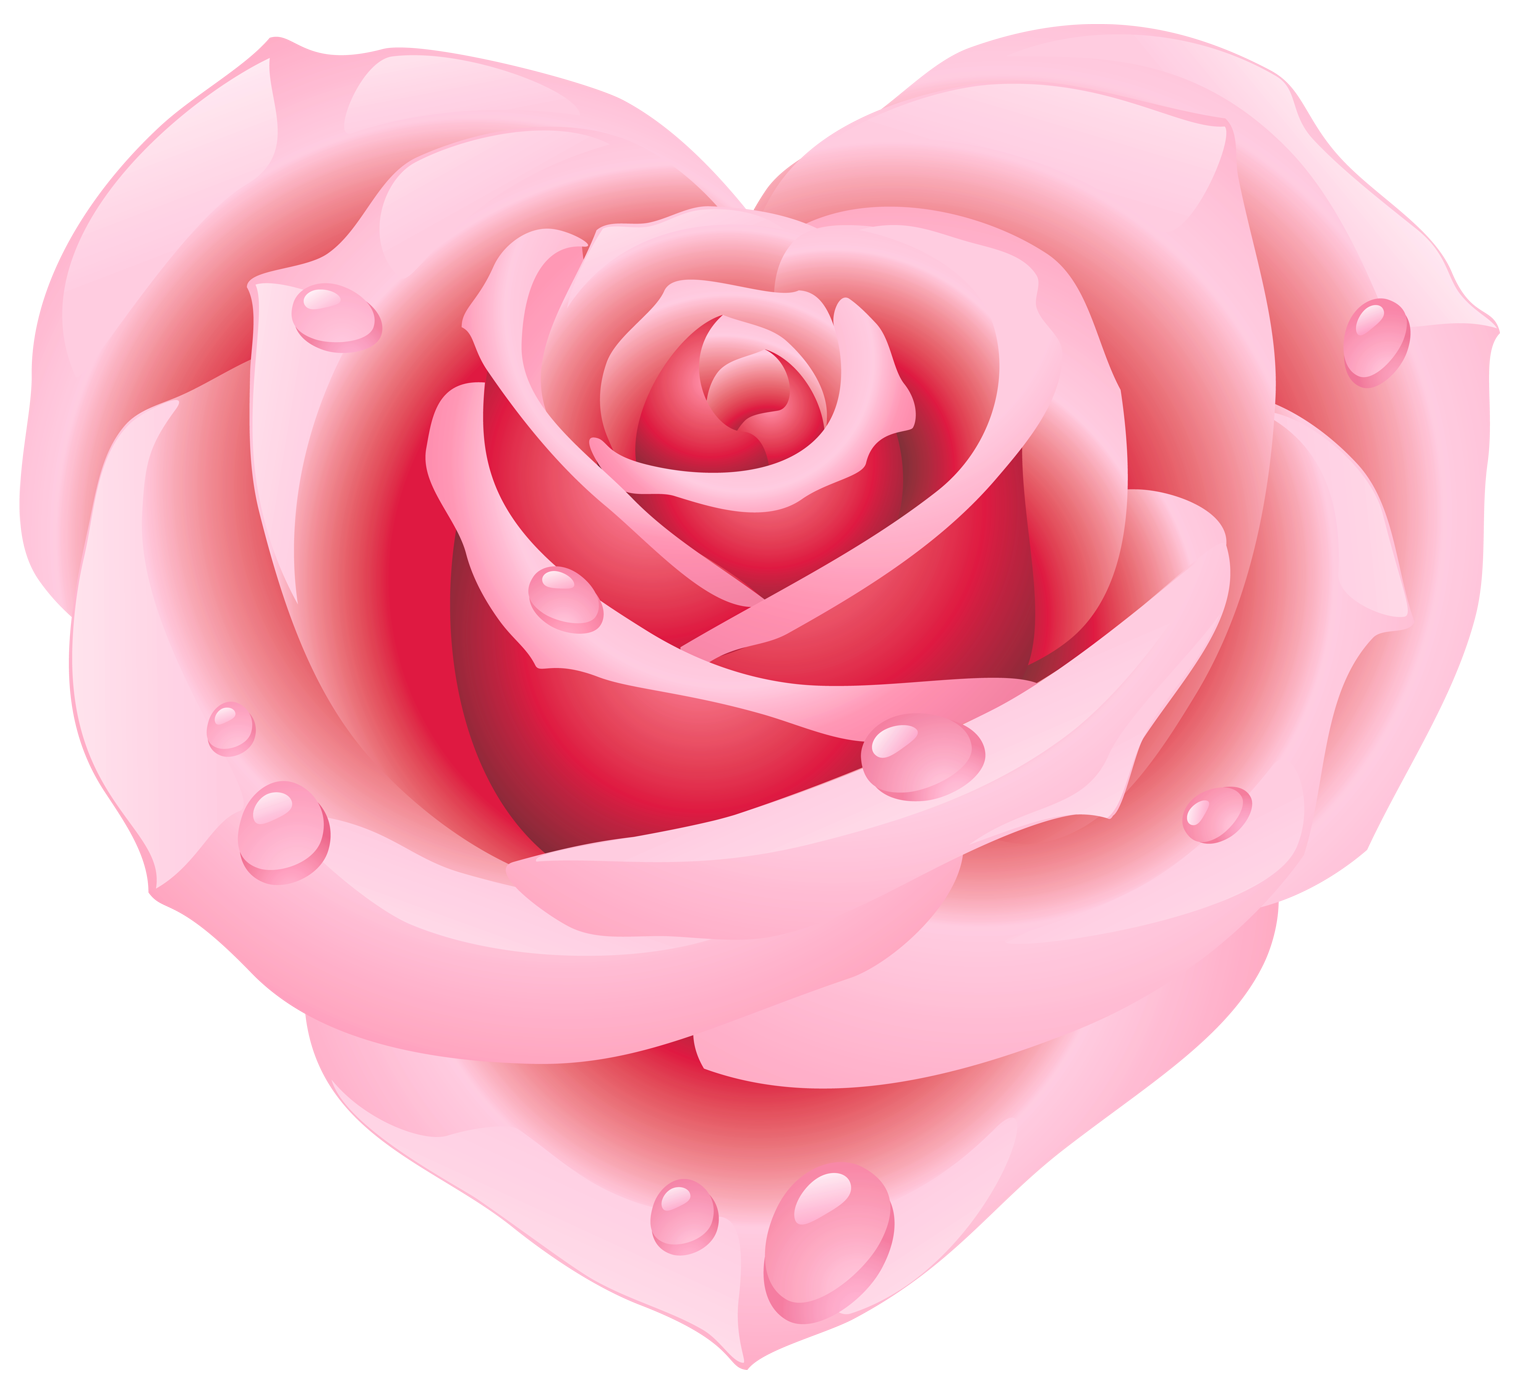 Large Pink Rose Heart Clipart